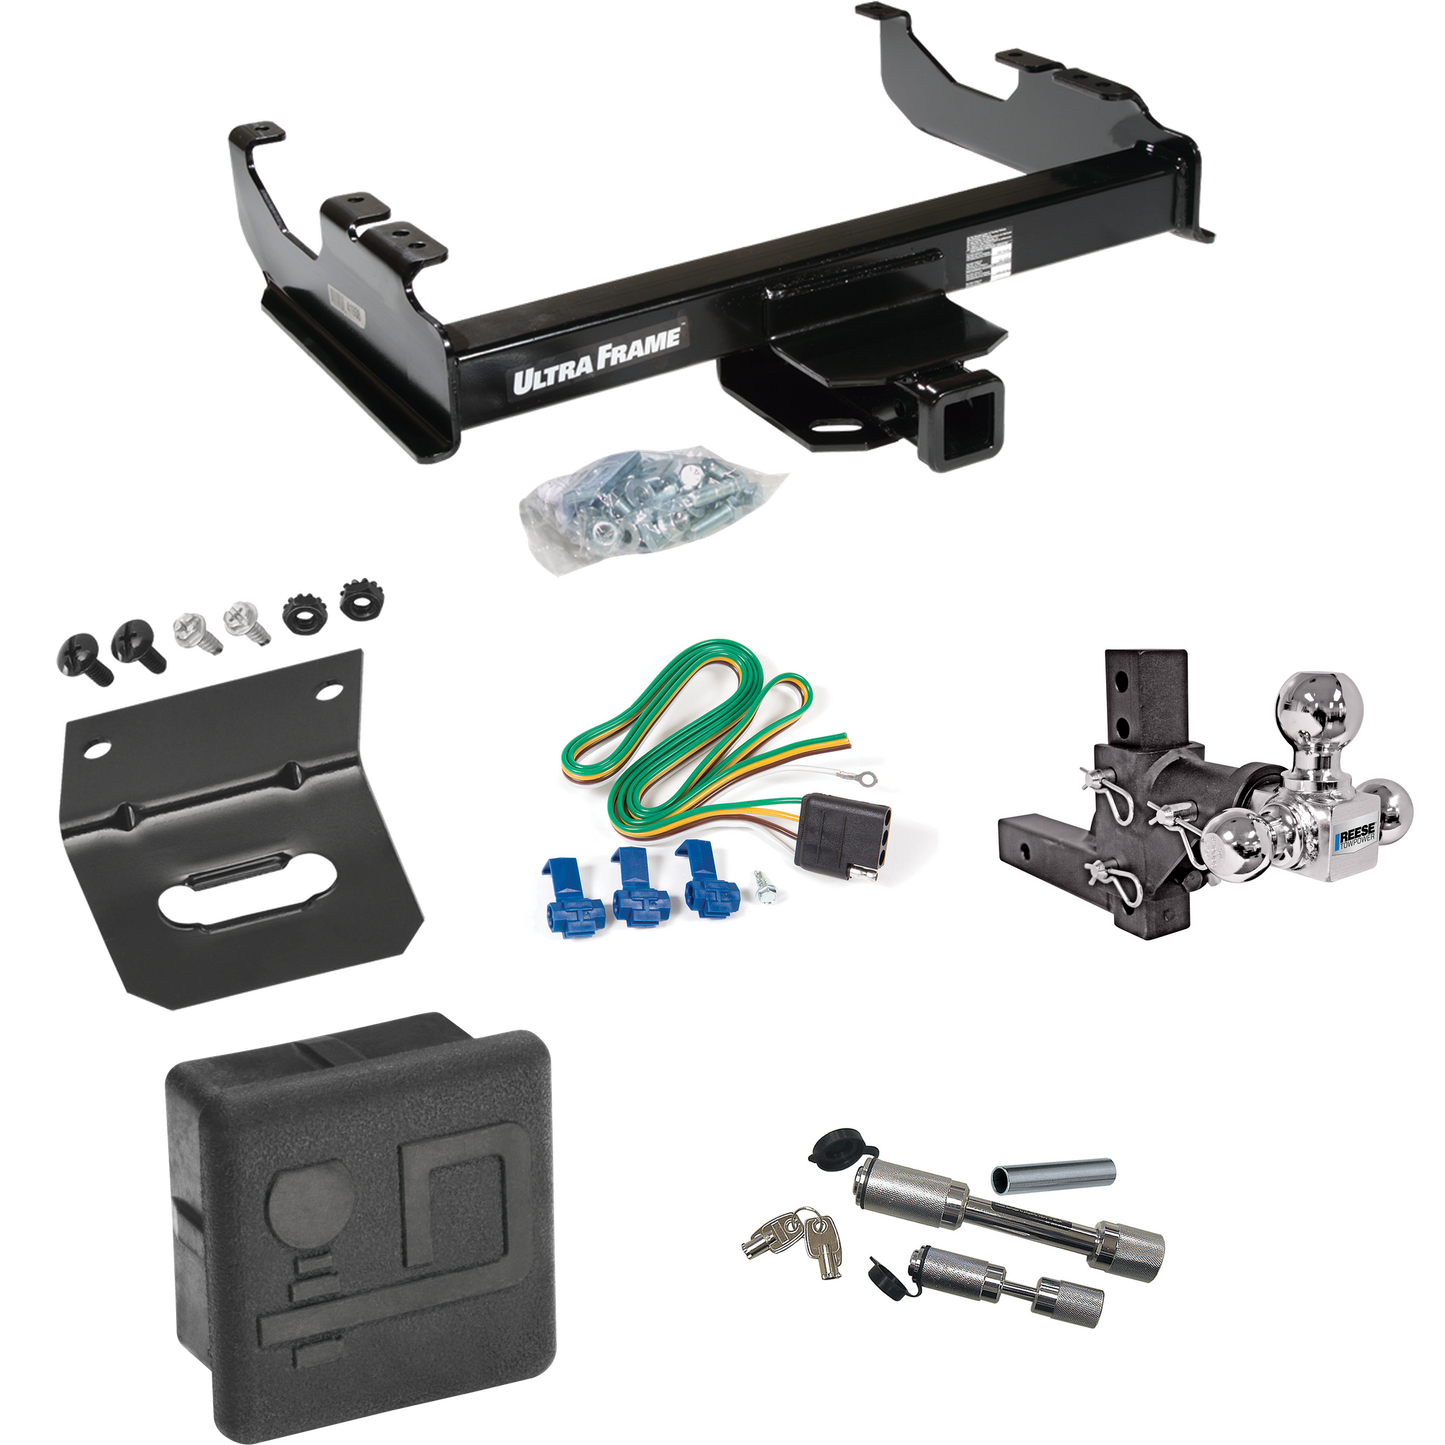 Fits 1963-1965 GMC 1000 Series Trailer Hitch Tow PKG w/ 4-Flat Wiring Harness + Adjustable Drop Rise Triple Ball Ball Mount 1-7/8" & 2" & 2-5/16" Trailer Balls + Dual Hitch & Coupler Locks + Hitch Cover + Wiring Bracket By Draw-Tite